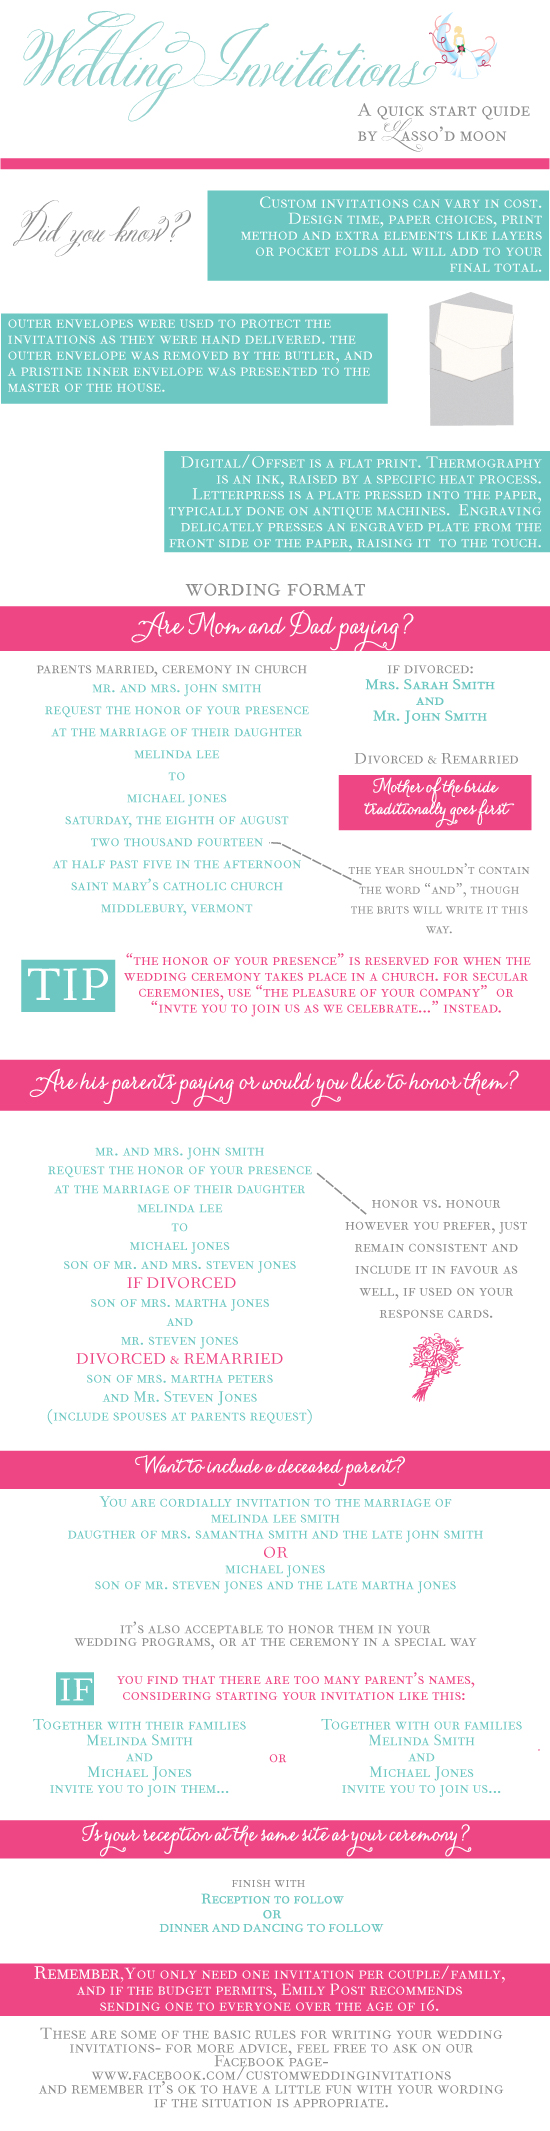 Wedding Invitation Wording Infographic . . . a quick start guide